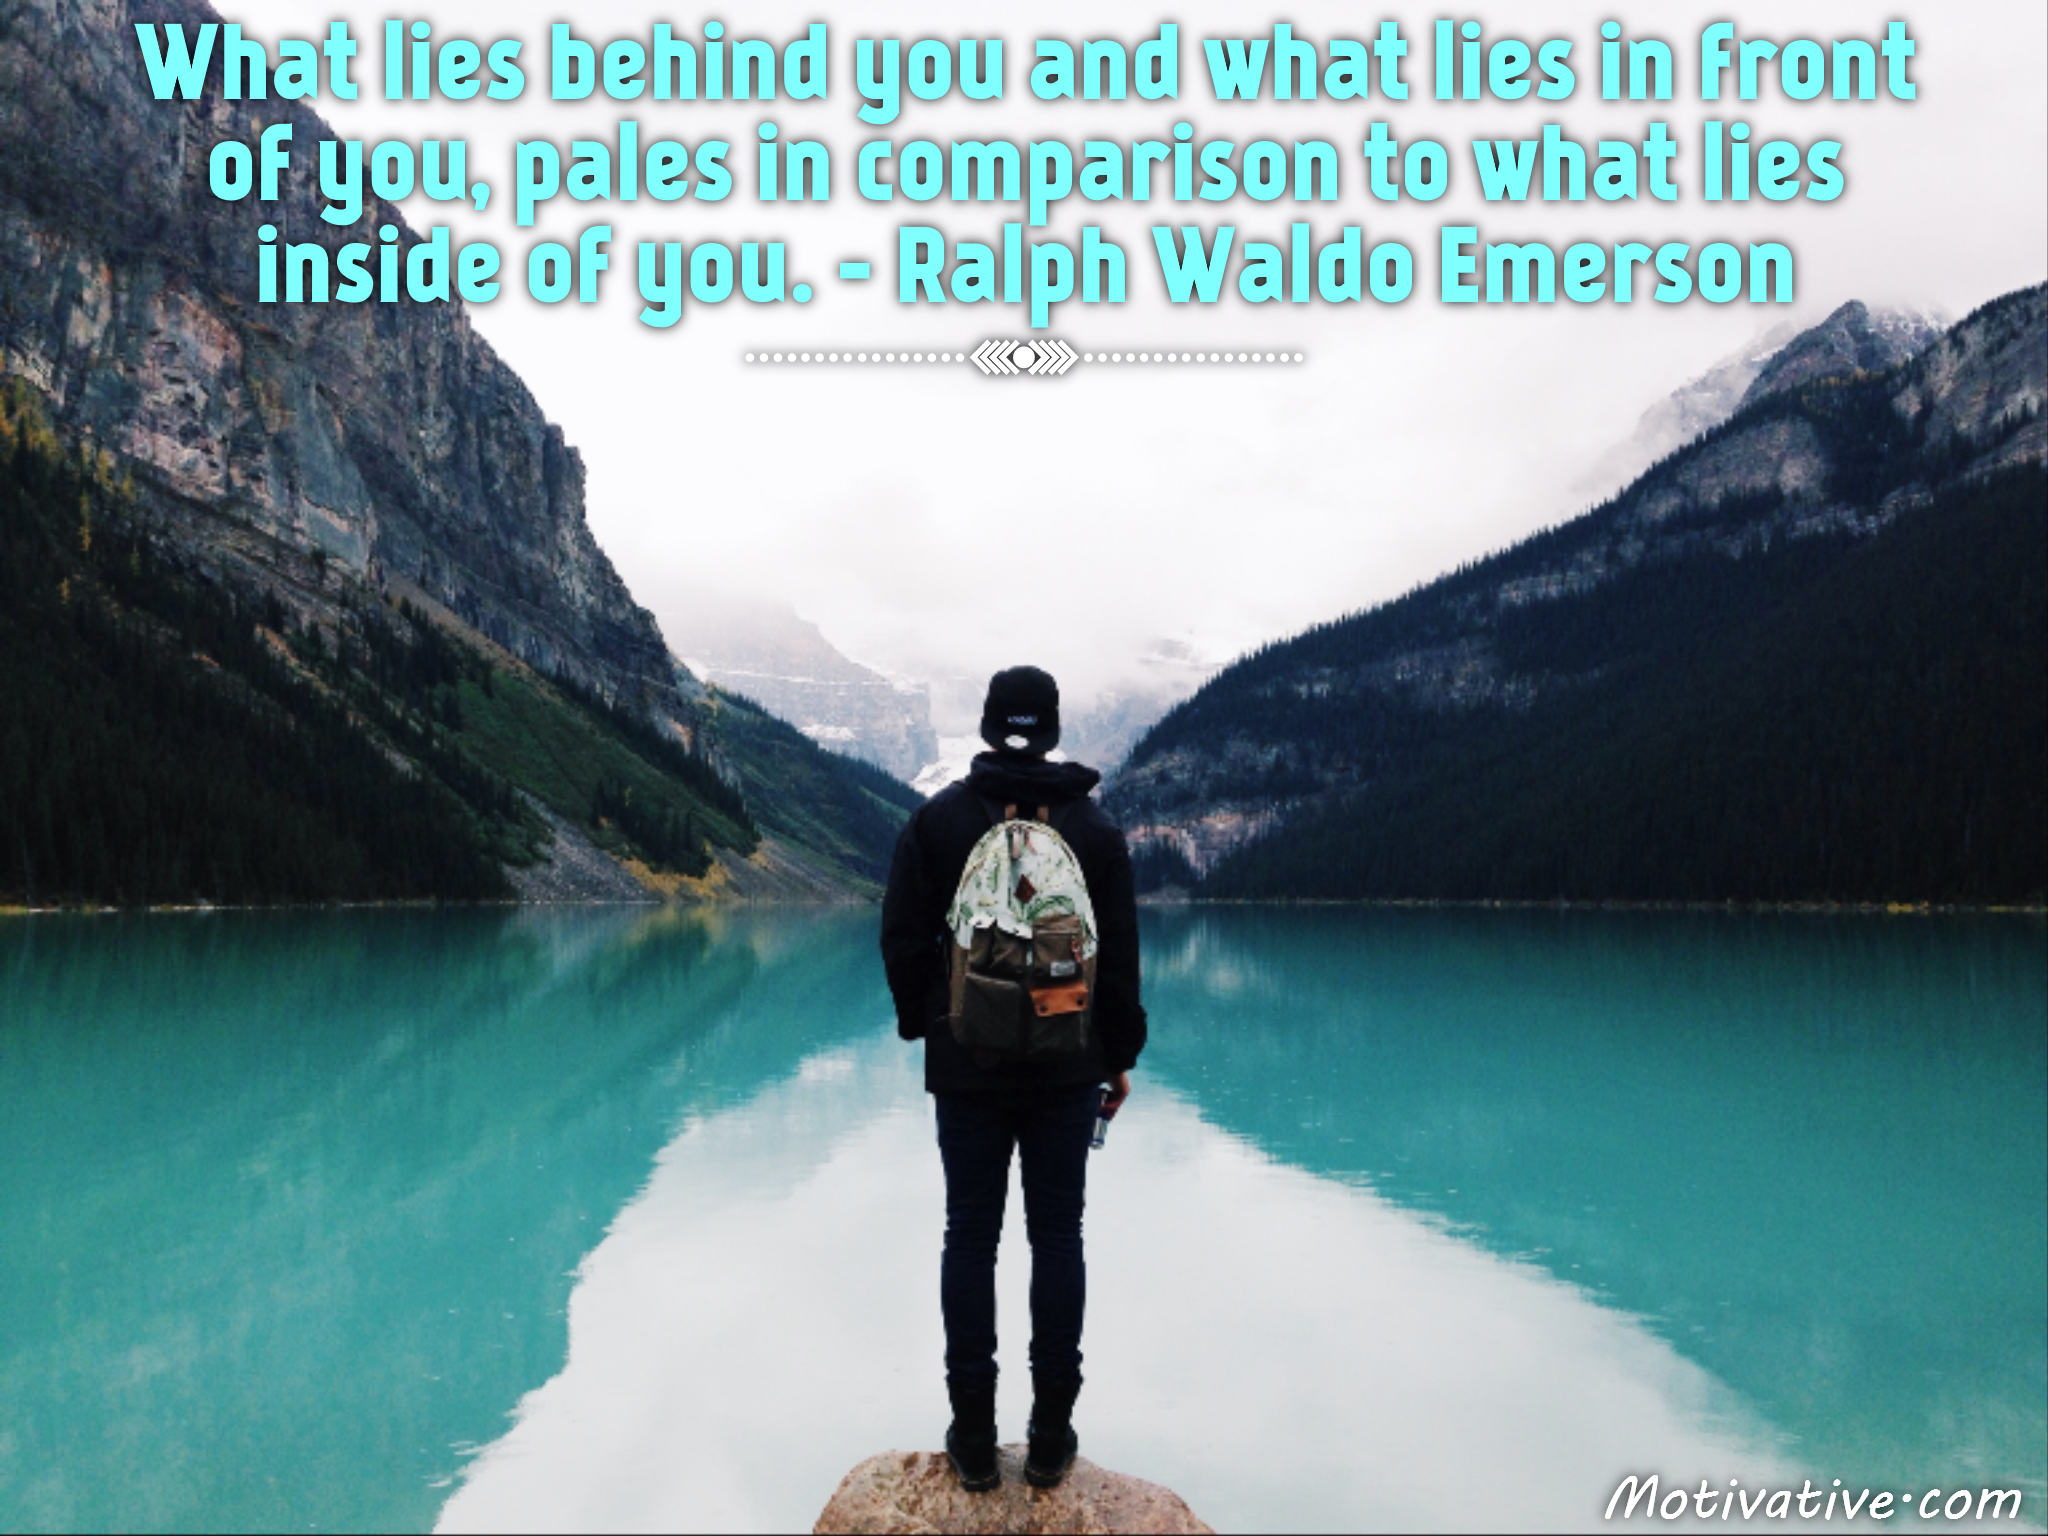 What lies behind you and what lies in front of you, pales in comparison to what lies inside of you. – Ralph Waldo Emerson